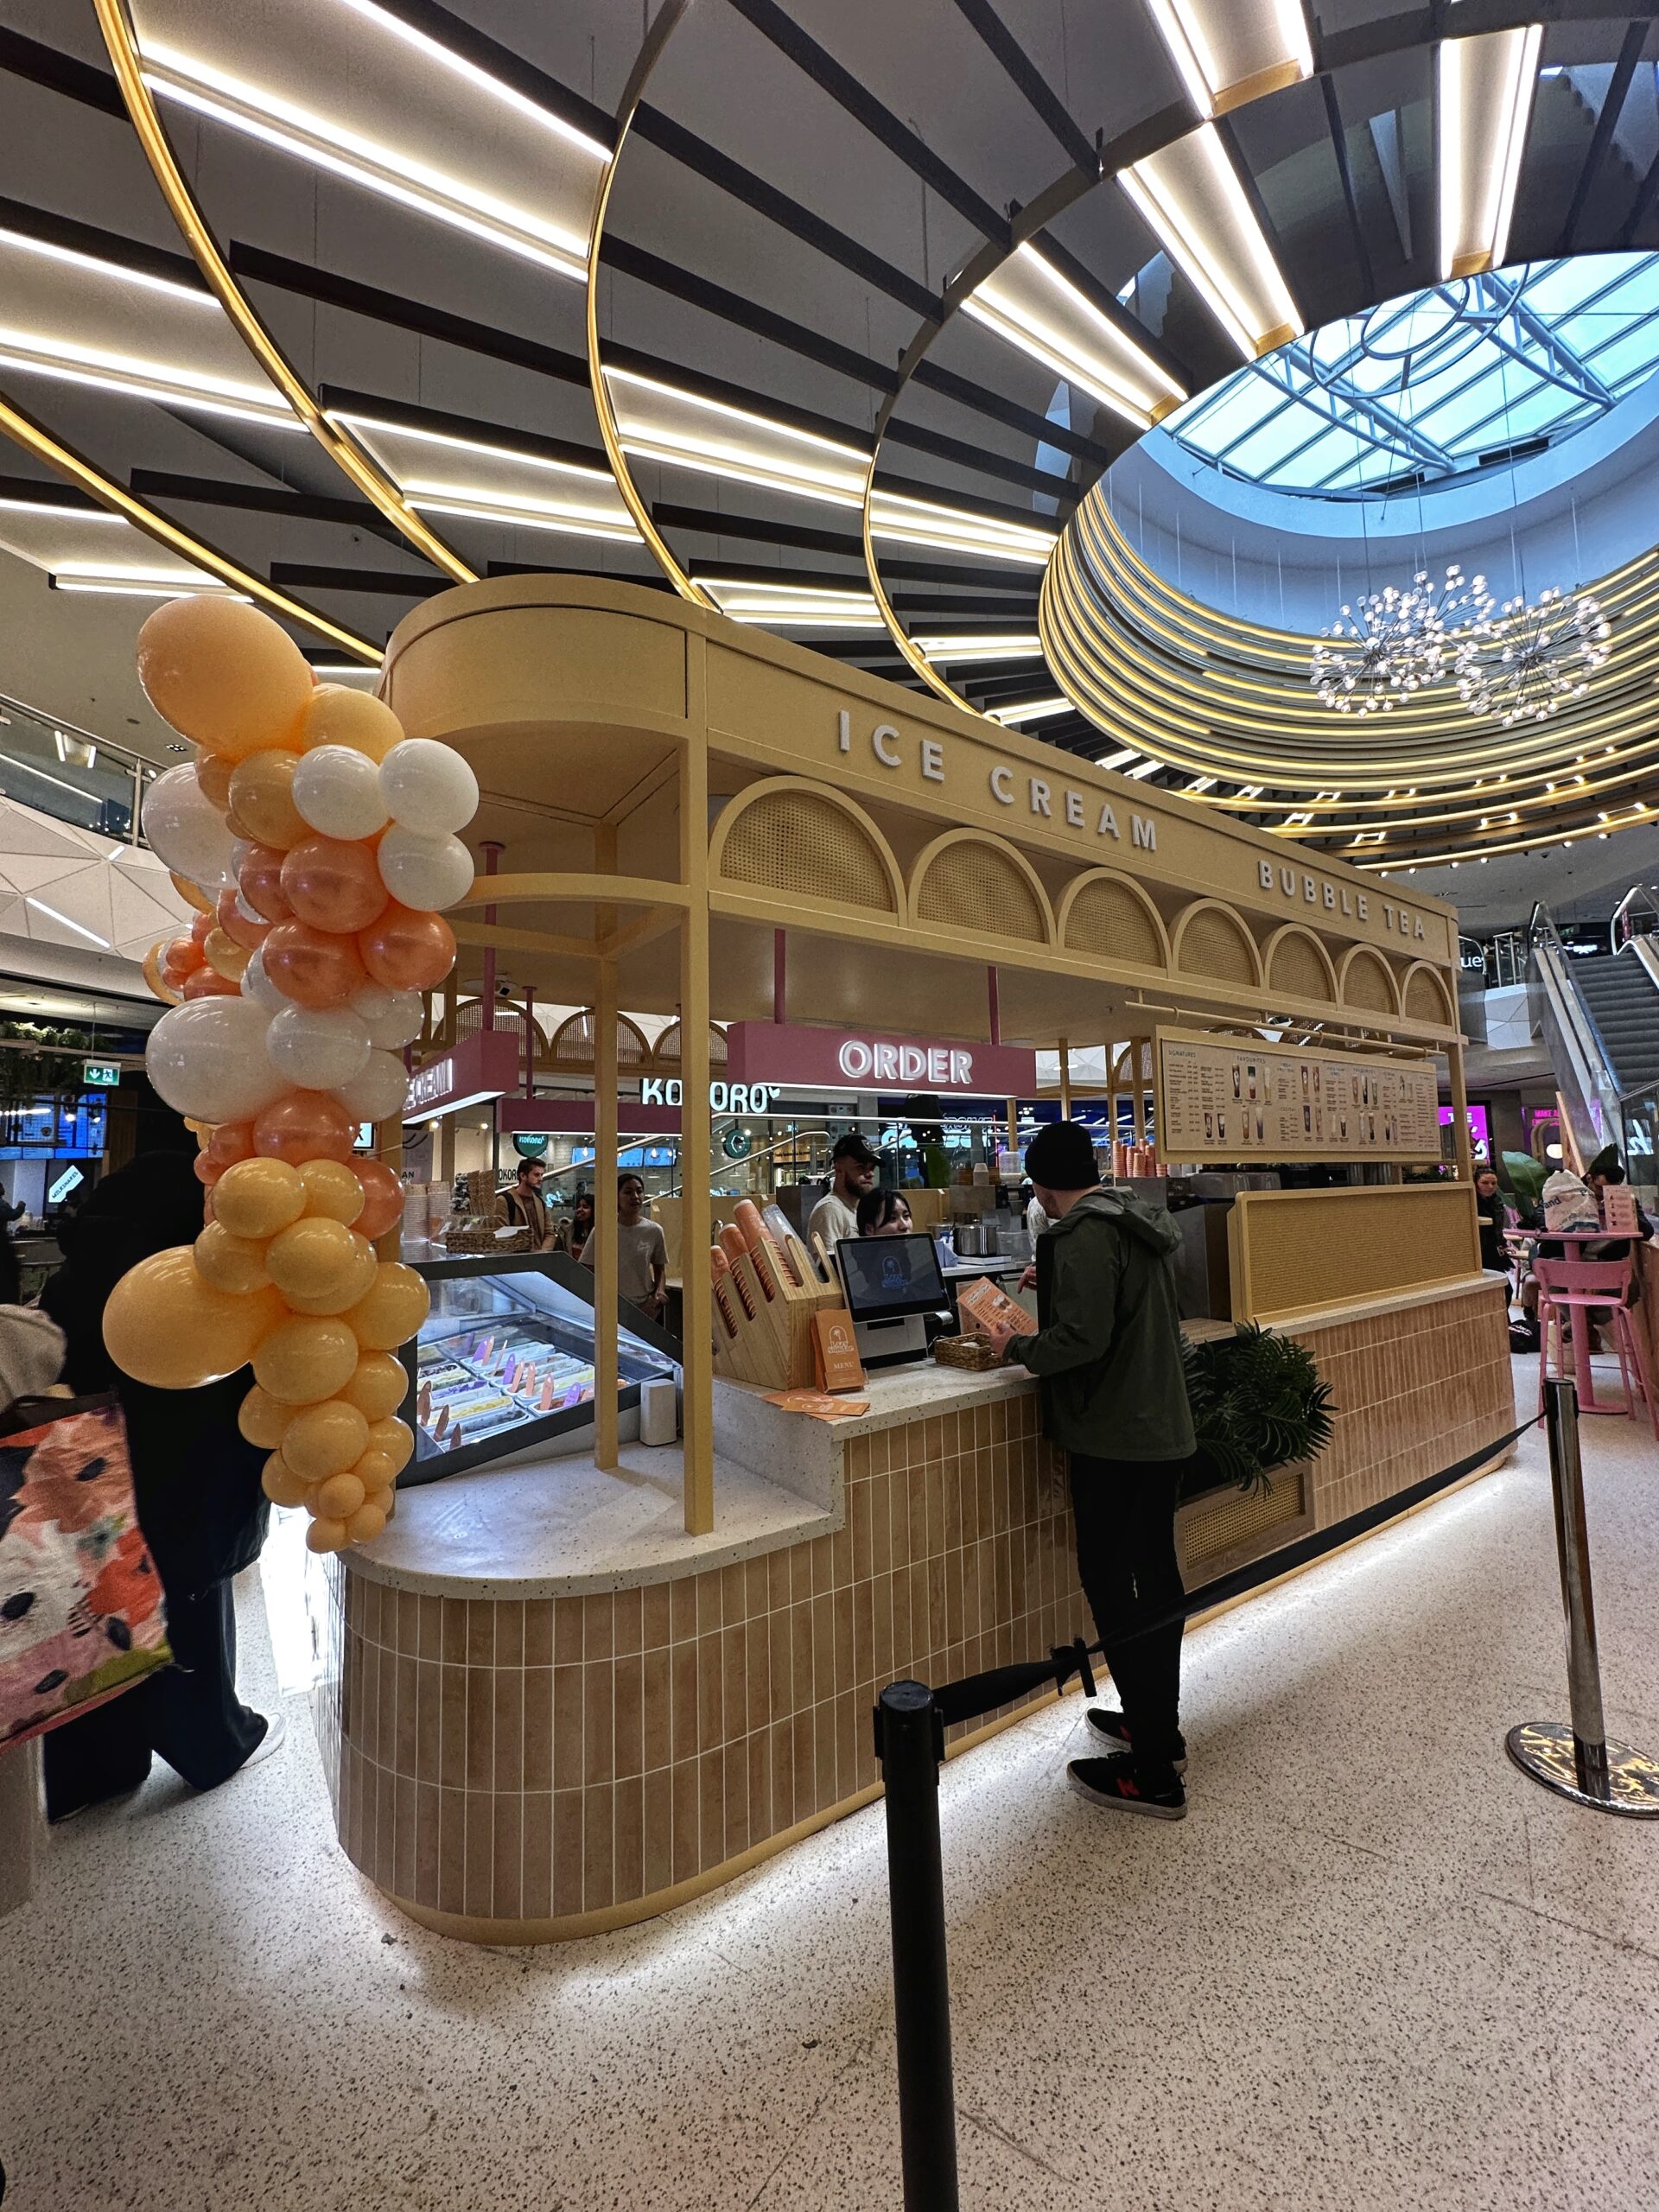 Lazy Sundae has opened a new ice cream parlour in the Manchester Arndale.